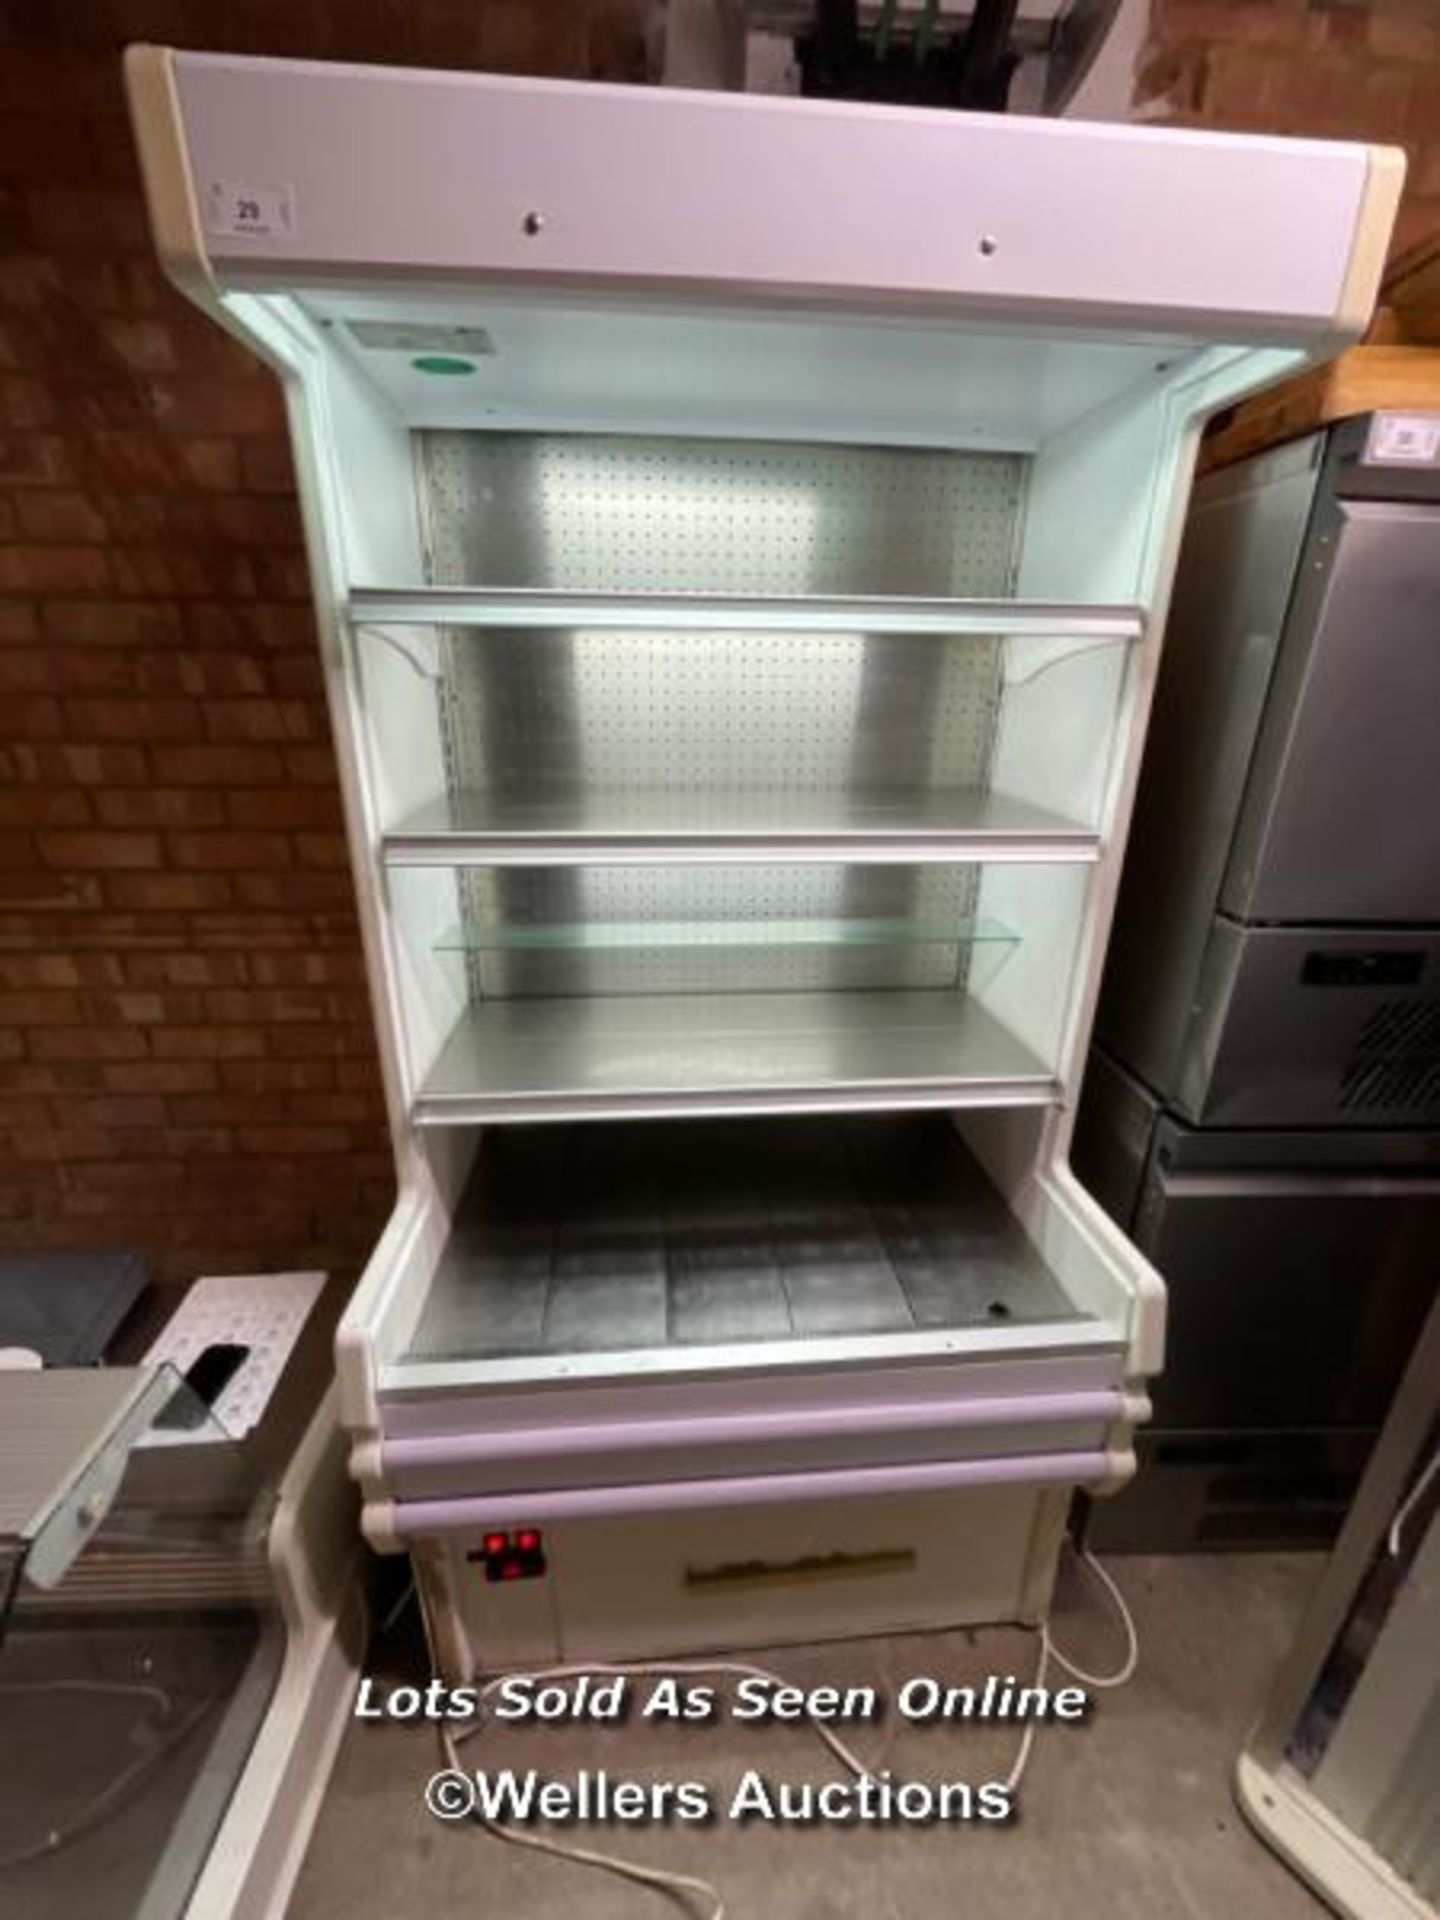 ZION DC10B DISPLAY FRIDGE - 182CM H X 100CM W X 76CM D / THE LOTS IN THIS AUCTION ARE LOCATED IN